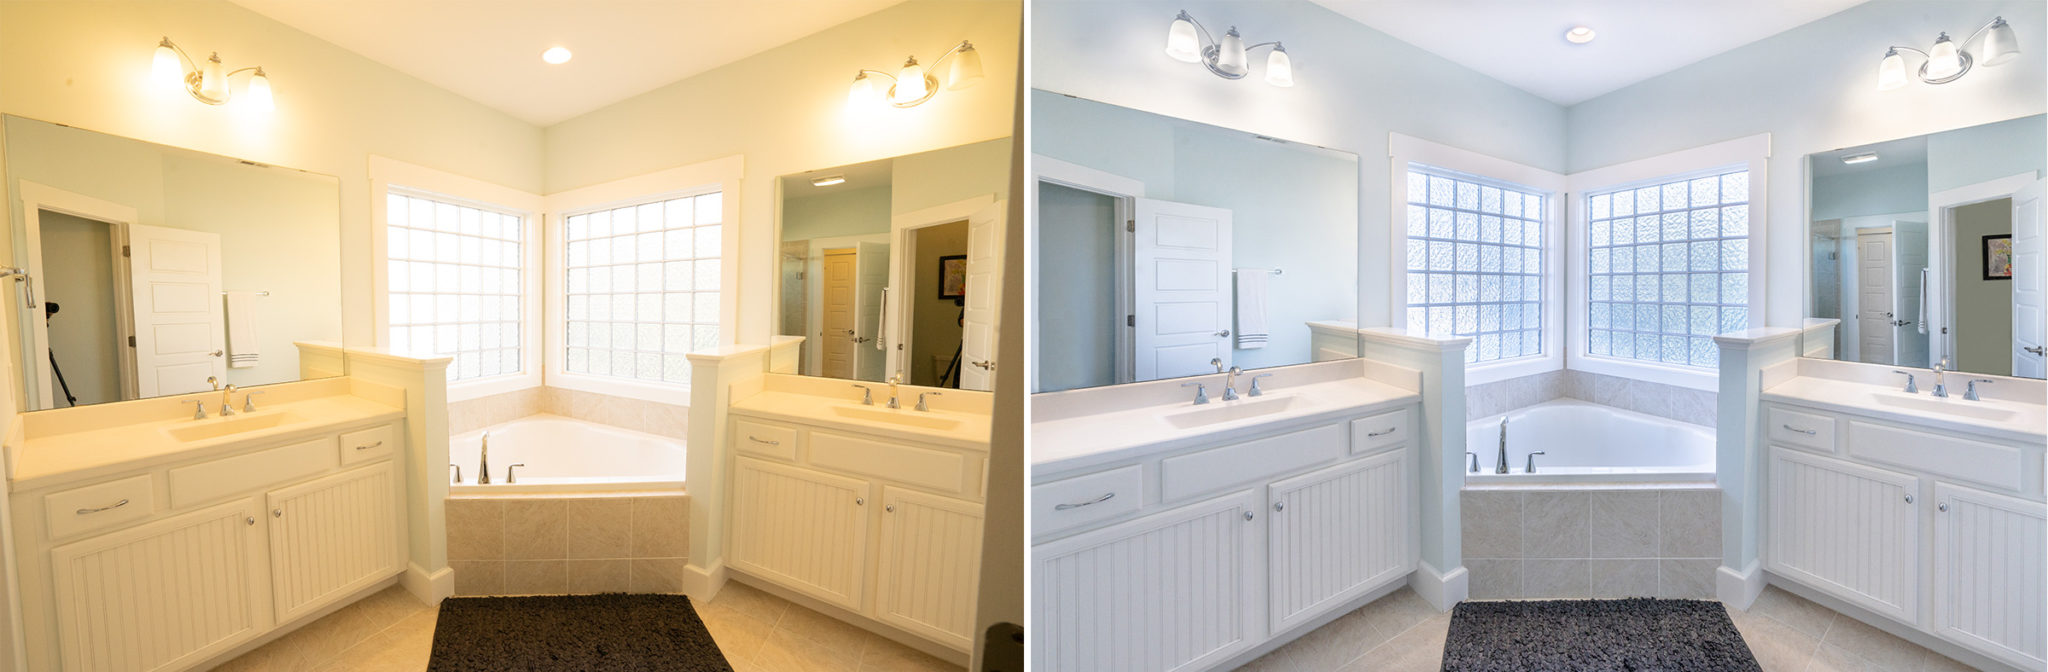 before and after bathroom realty